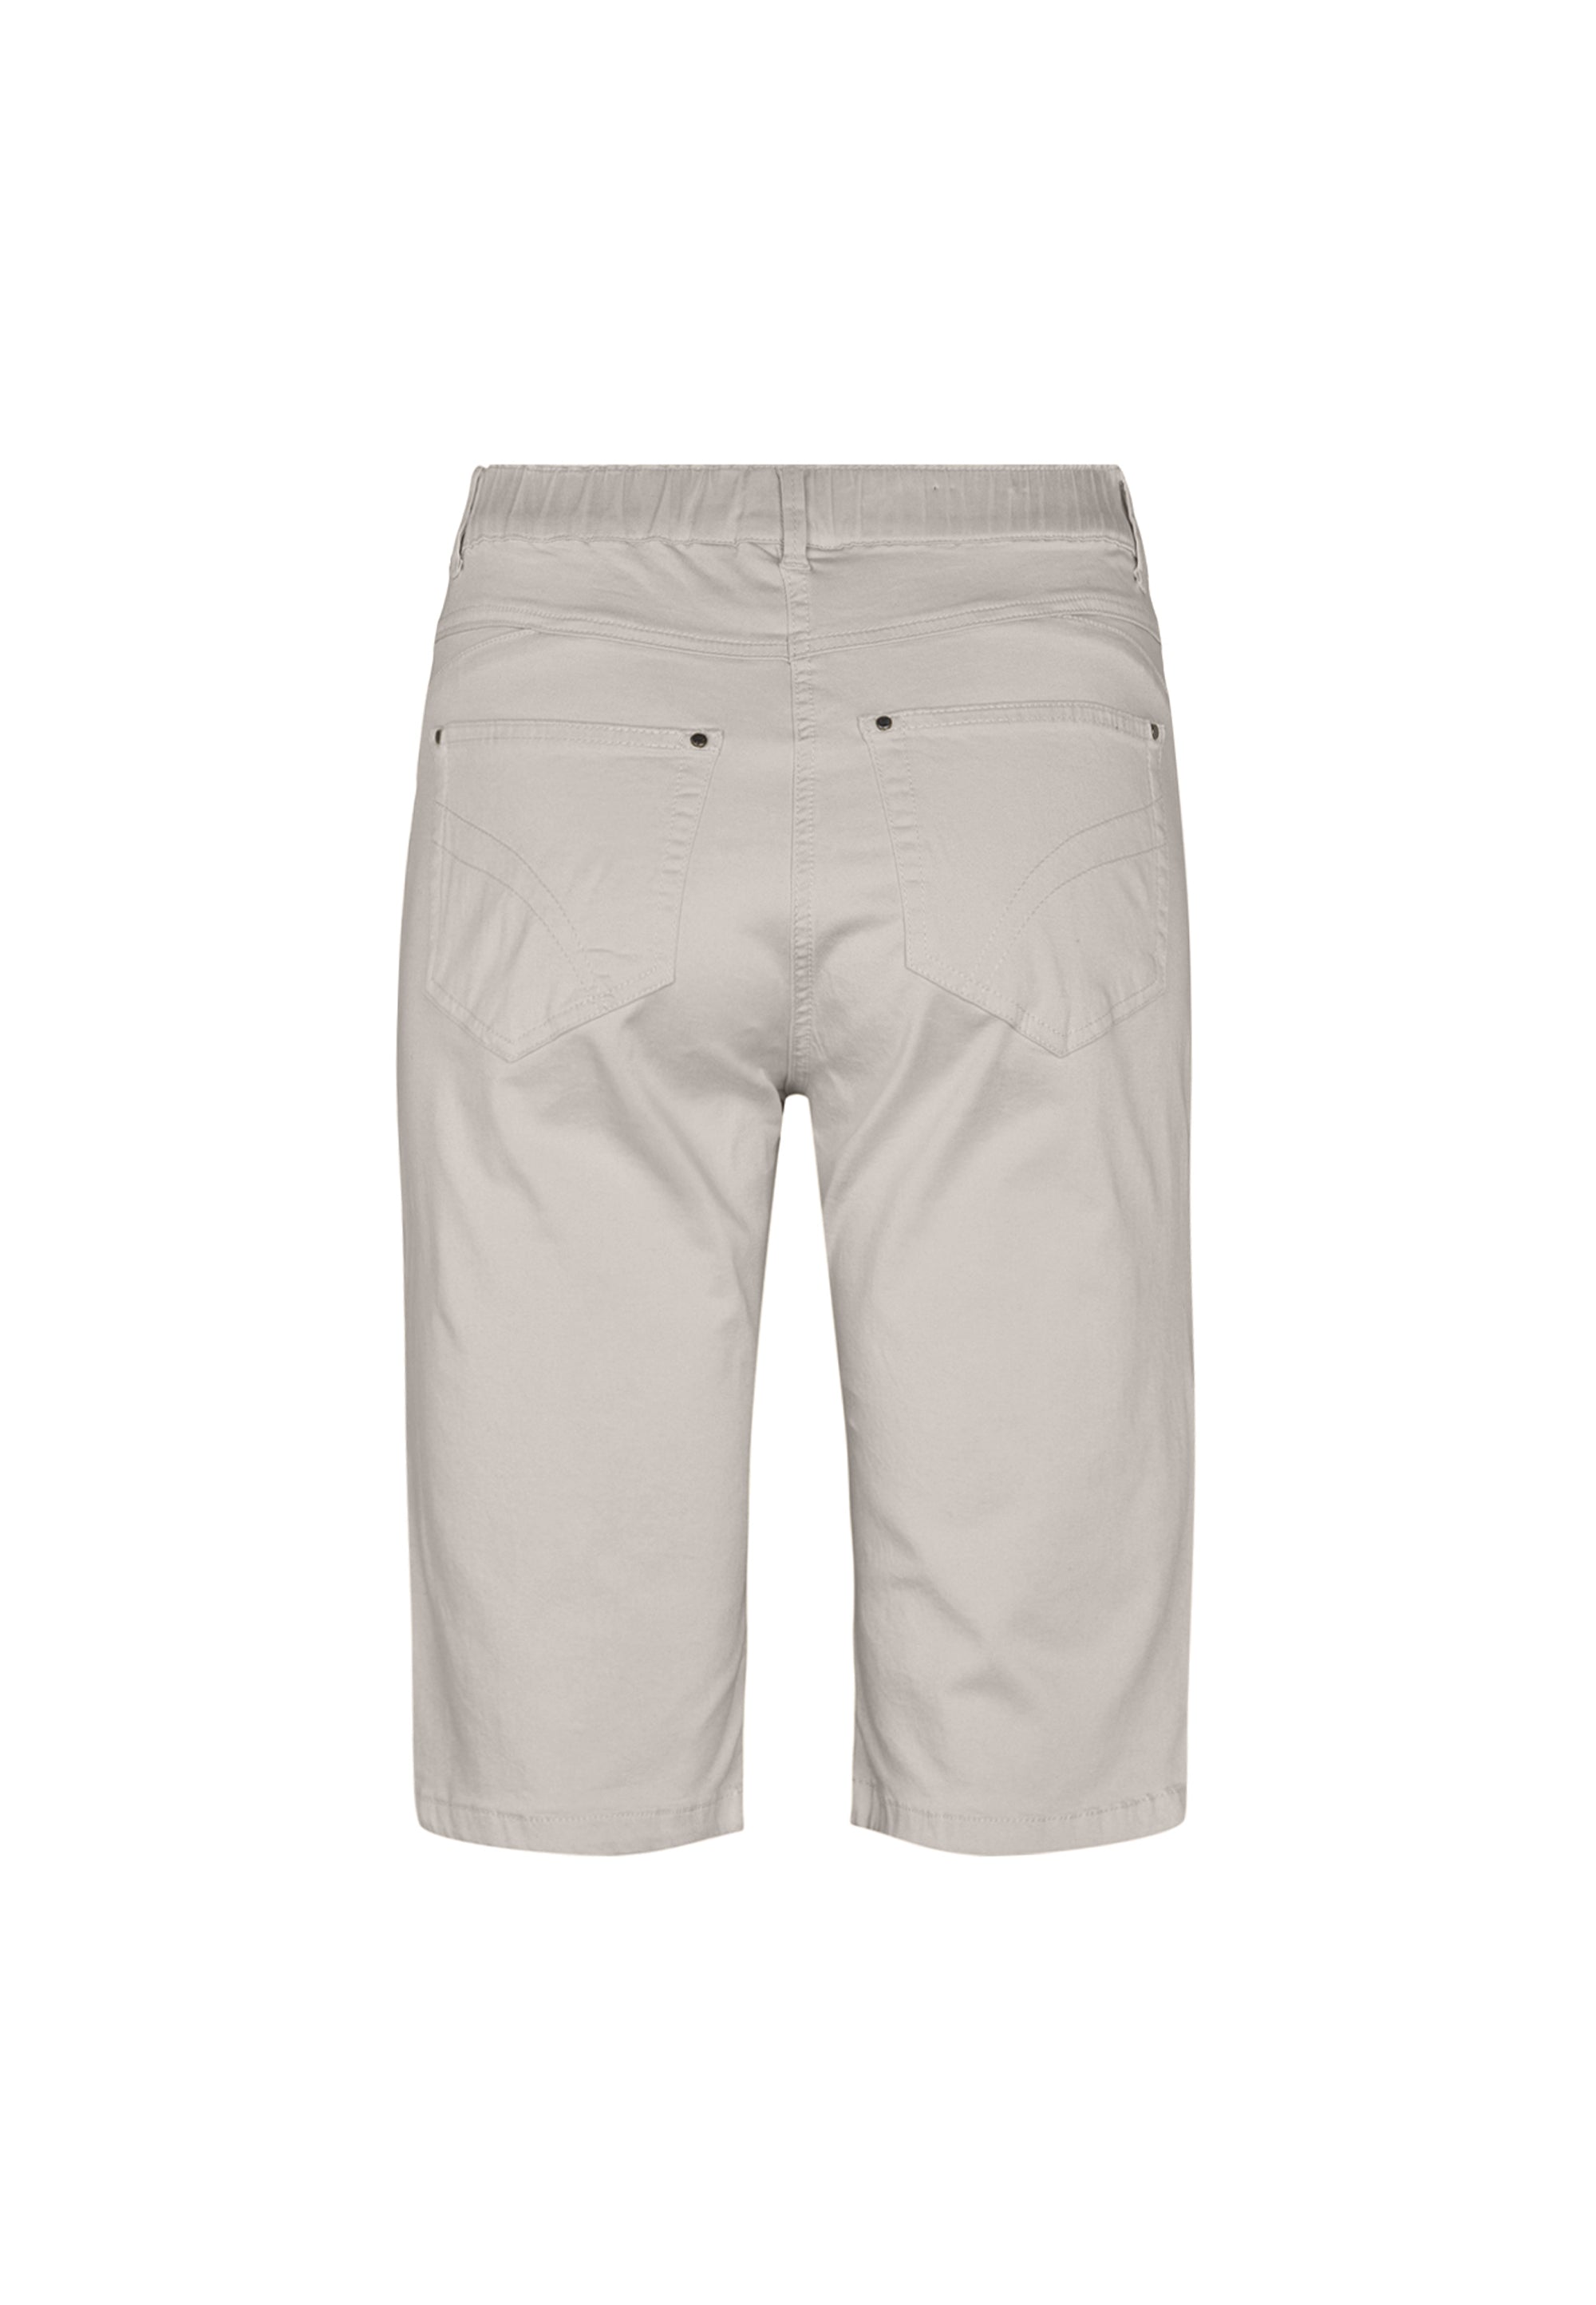 LAURIE Helen Straight Shorts Trousers STRAIGHT Grau sand